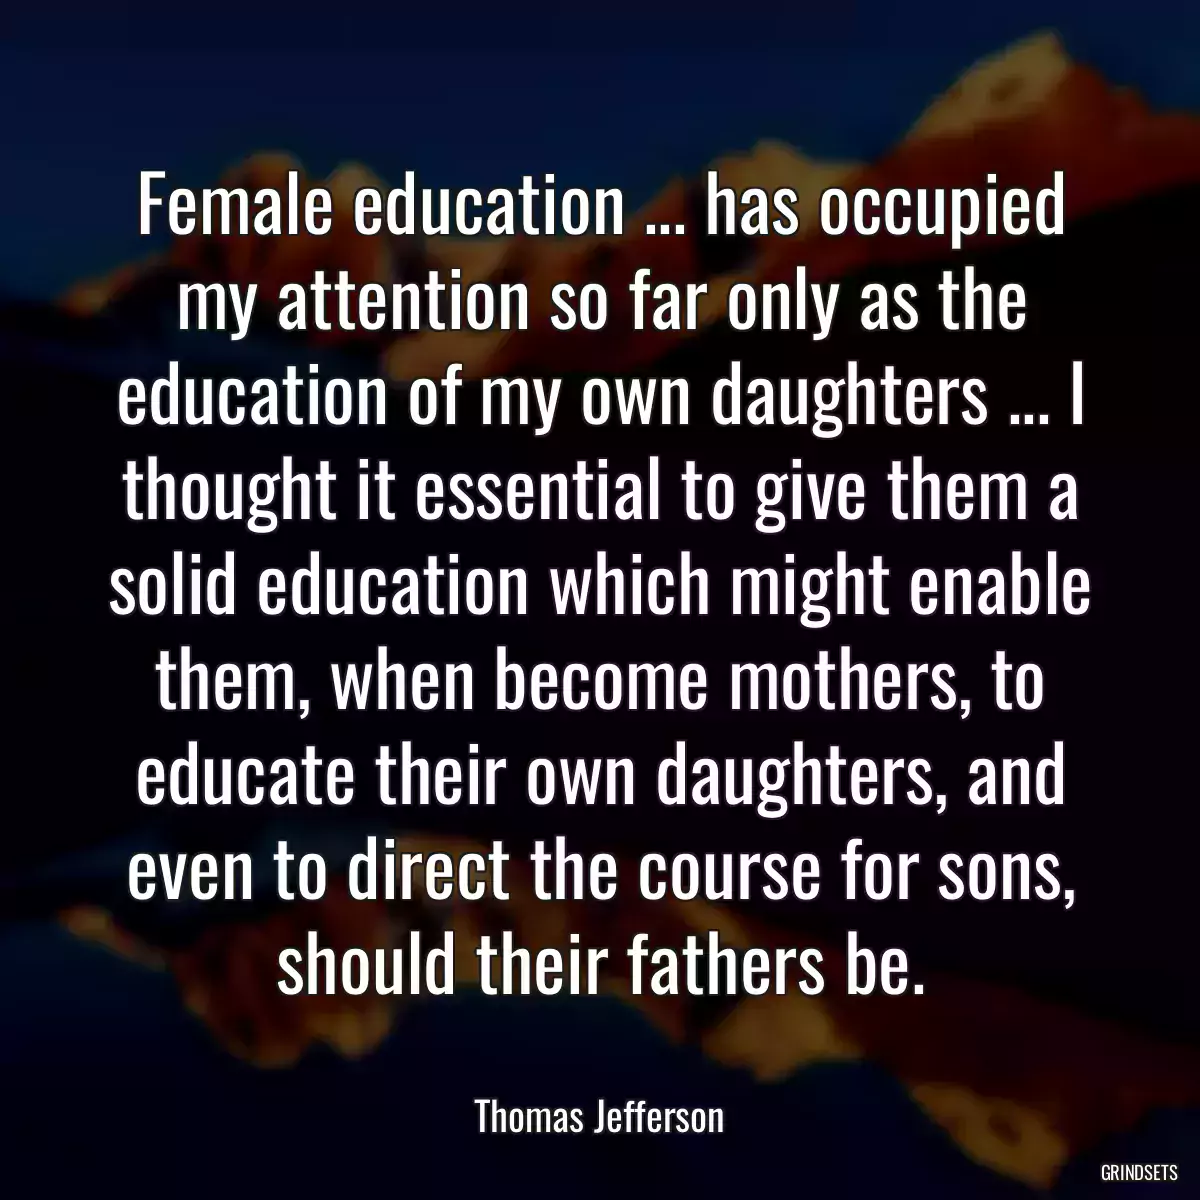 Female education ... has occupied my attention so far only as the education of my own daughters ... I thought it essential to give them a solid education which might enable them, when become mothers, to educate their own daughters, and even to direct the course for sons, should their fathers be.